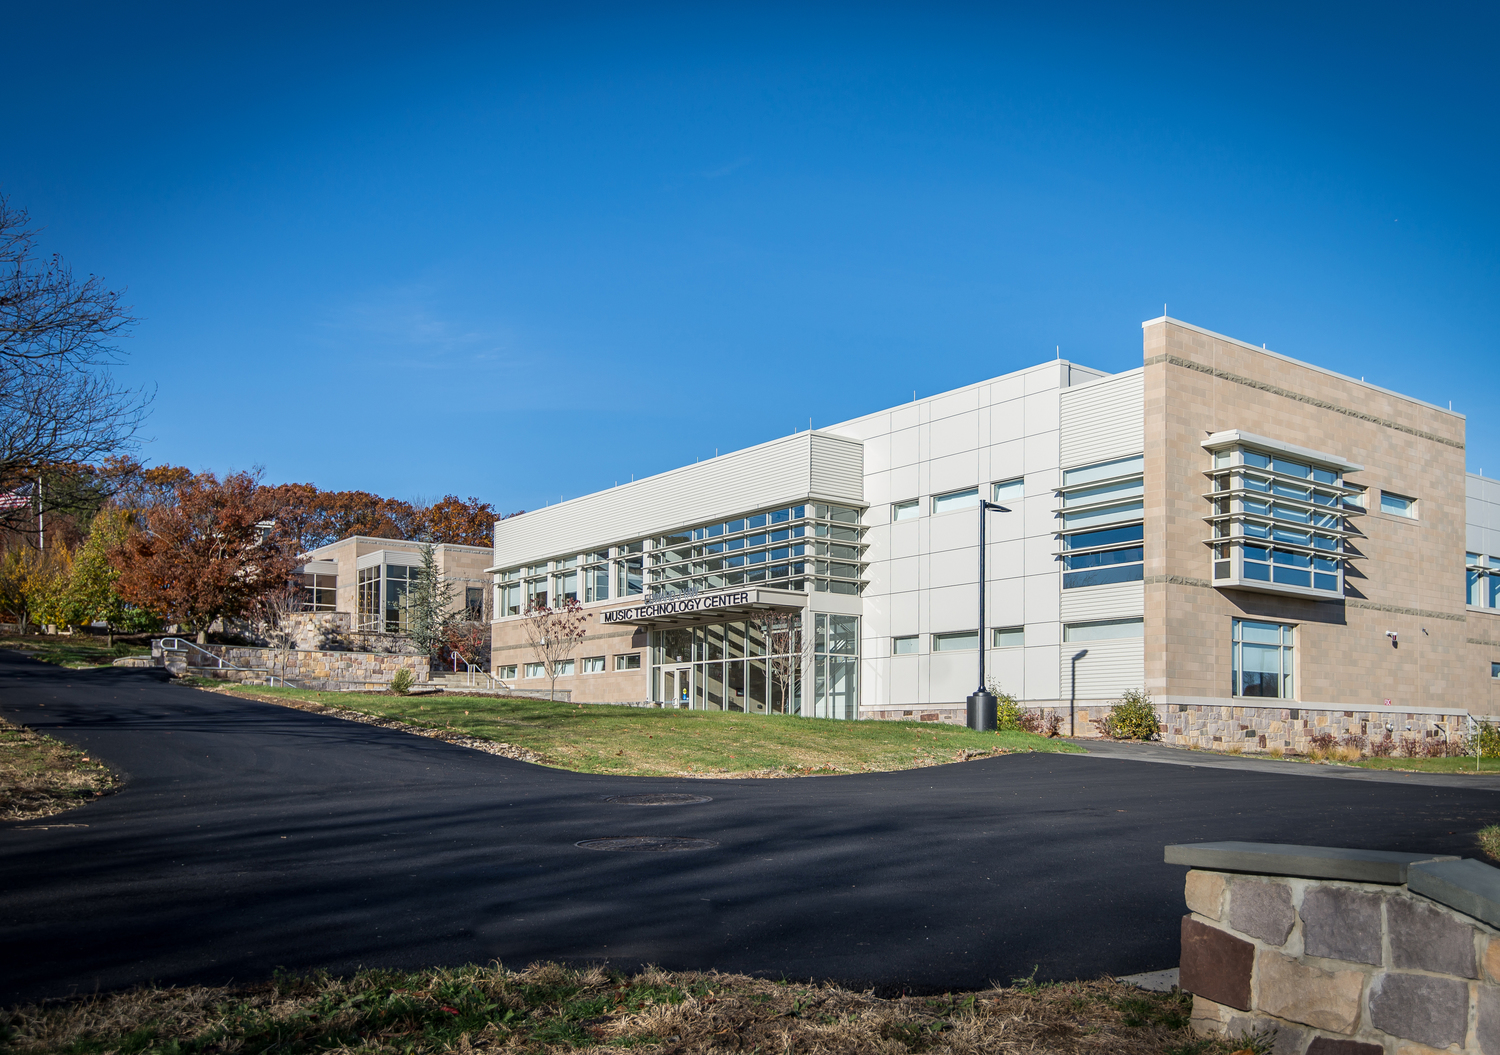 County College of Morris Music Technology Center